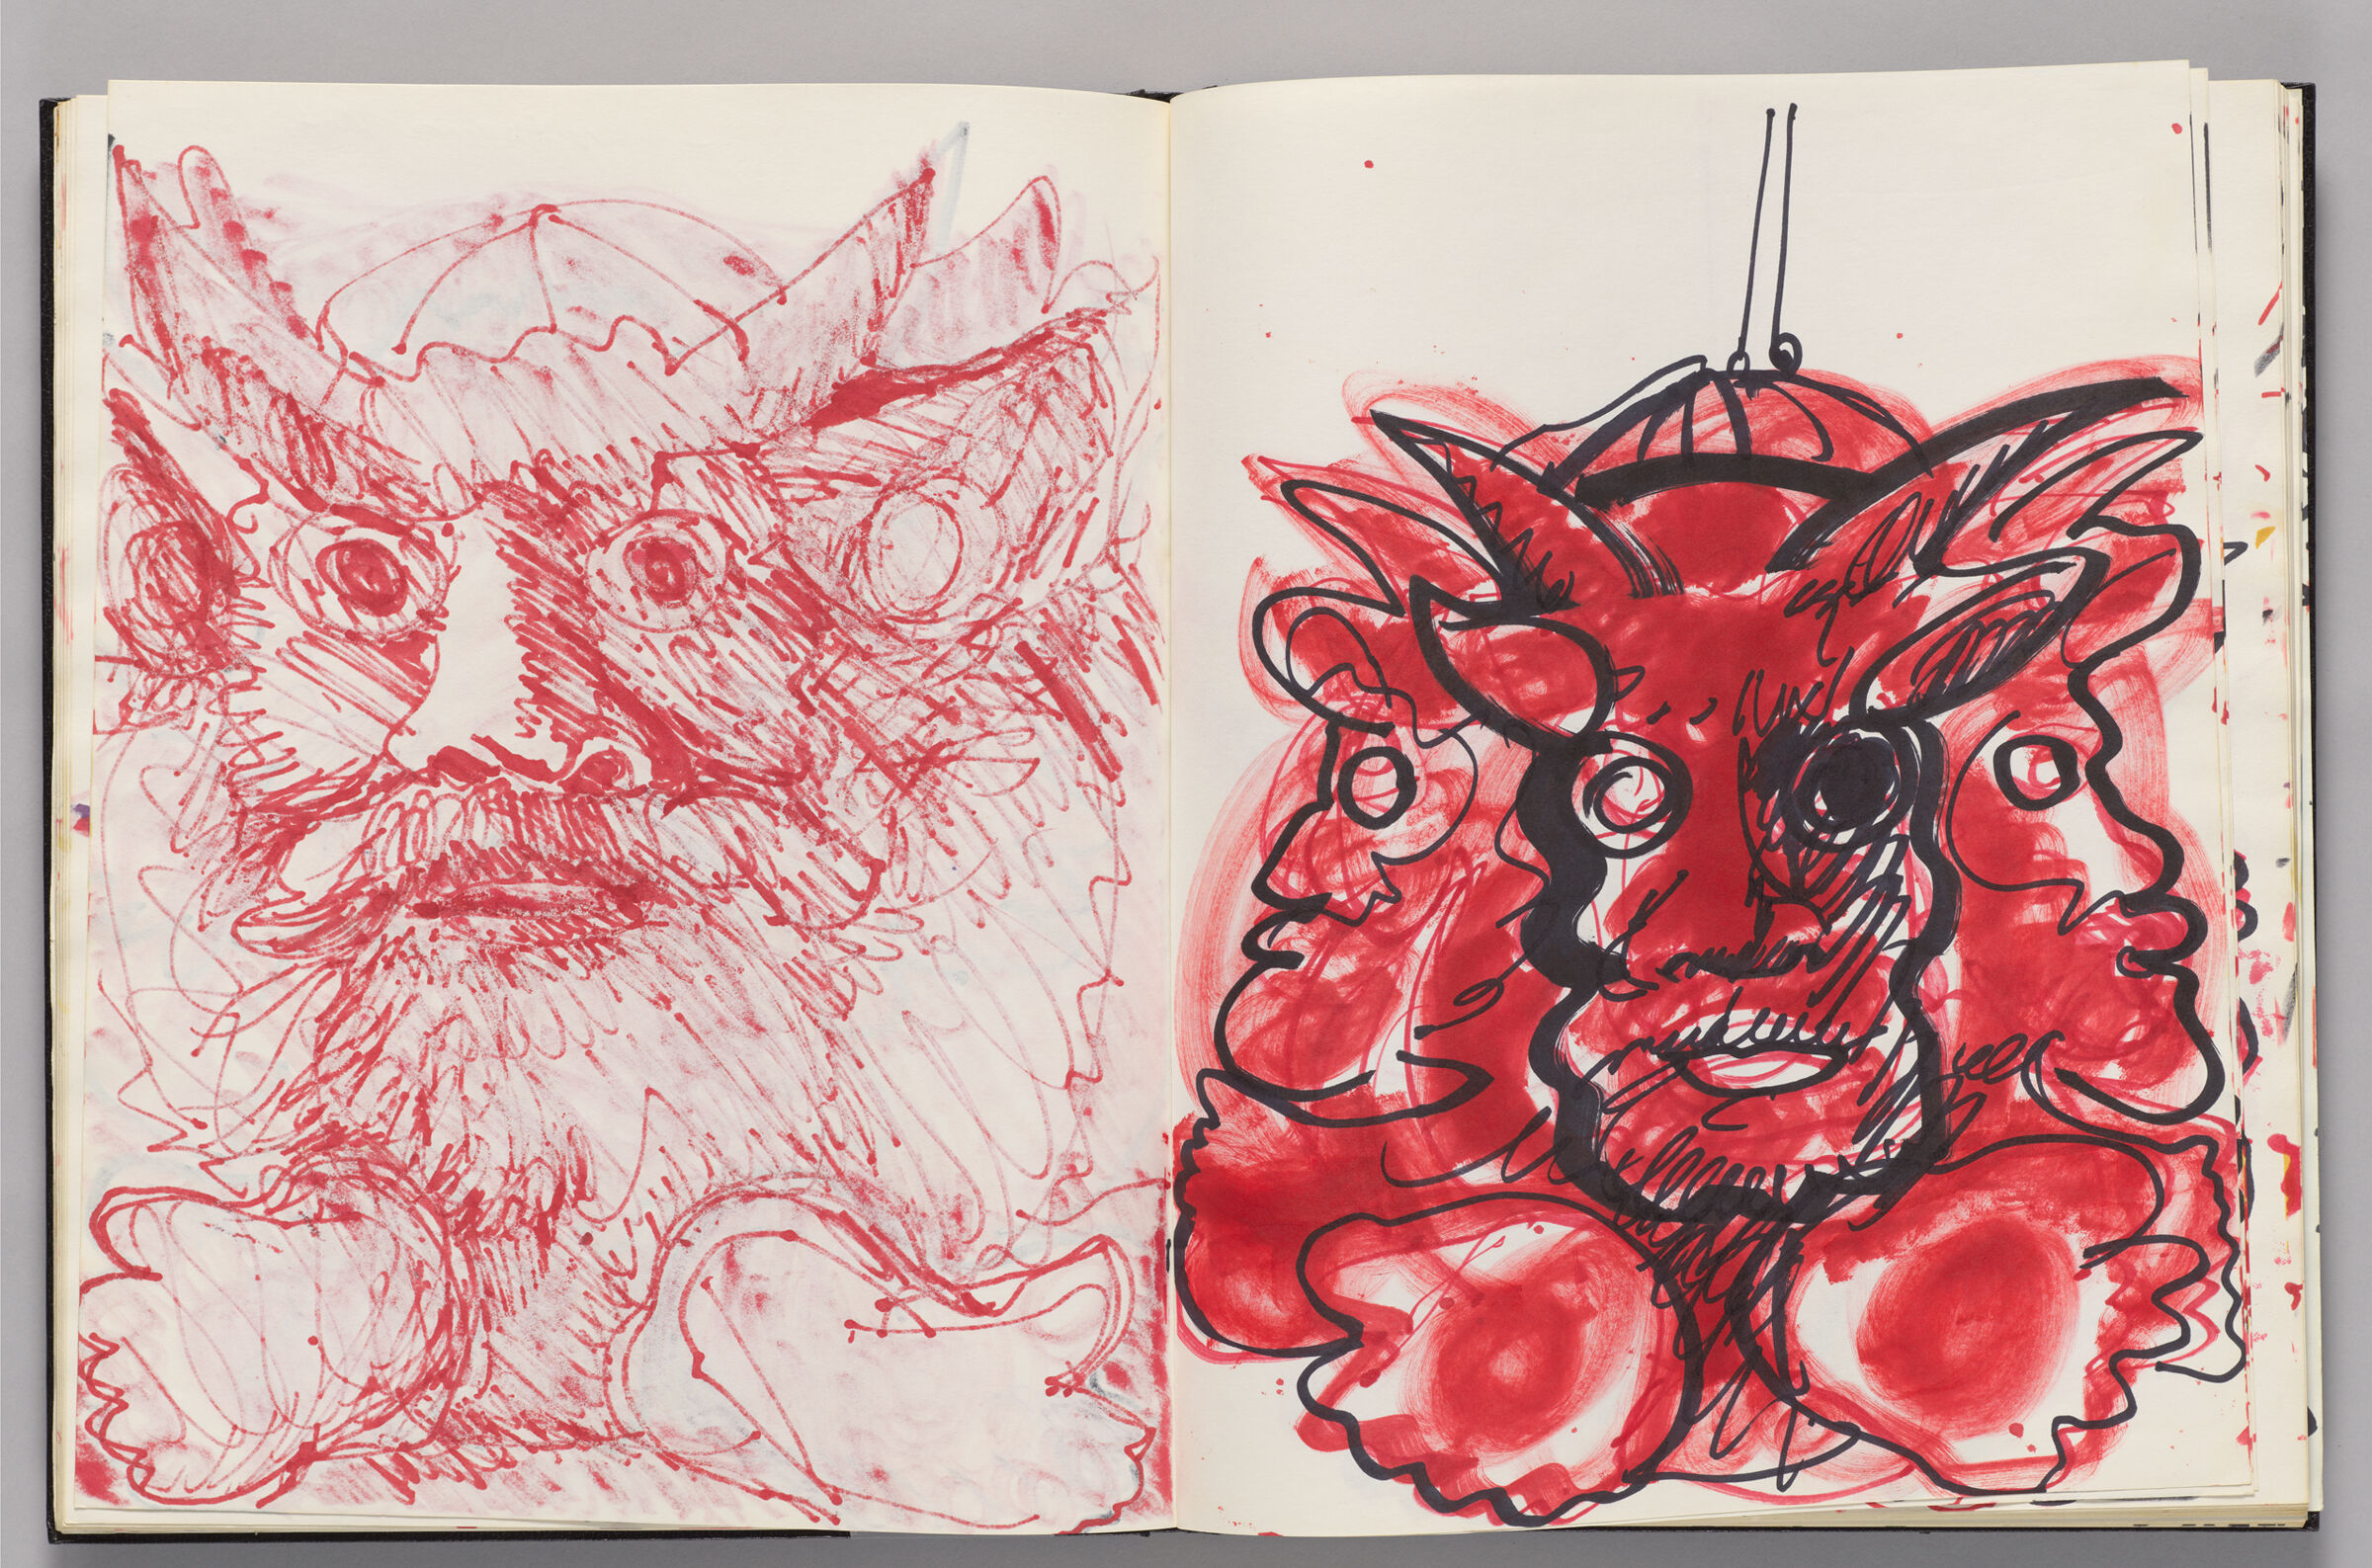 Untitled (Bleed-Through Of Previous Page, Left Page); Untitled (Close-Up Of Minotaurs In Red And Black, Right Page)